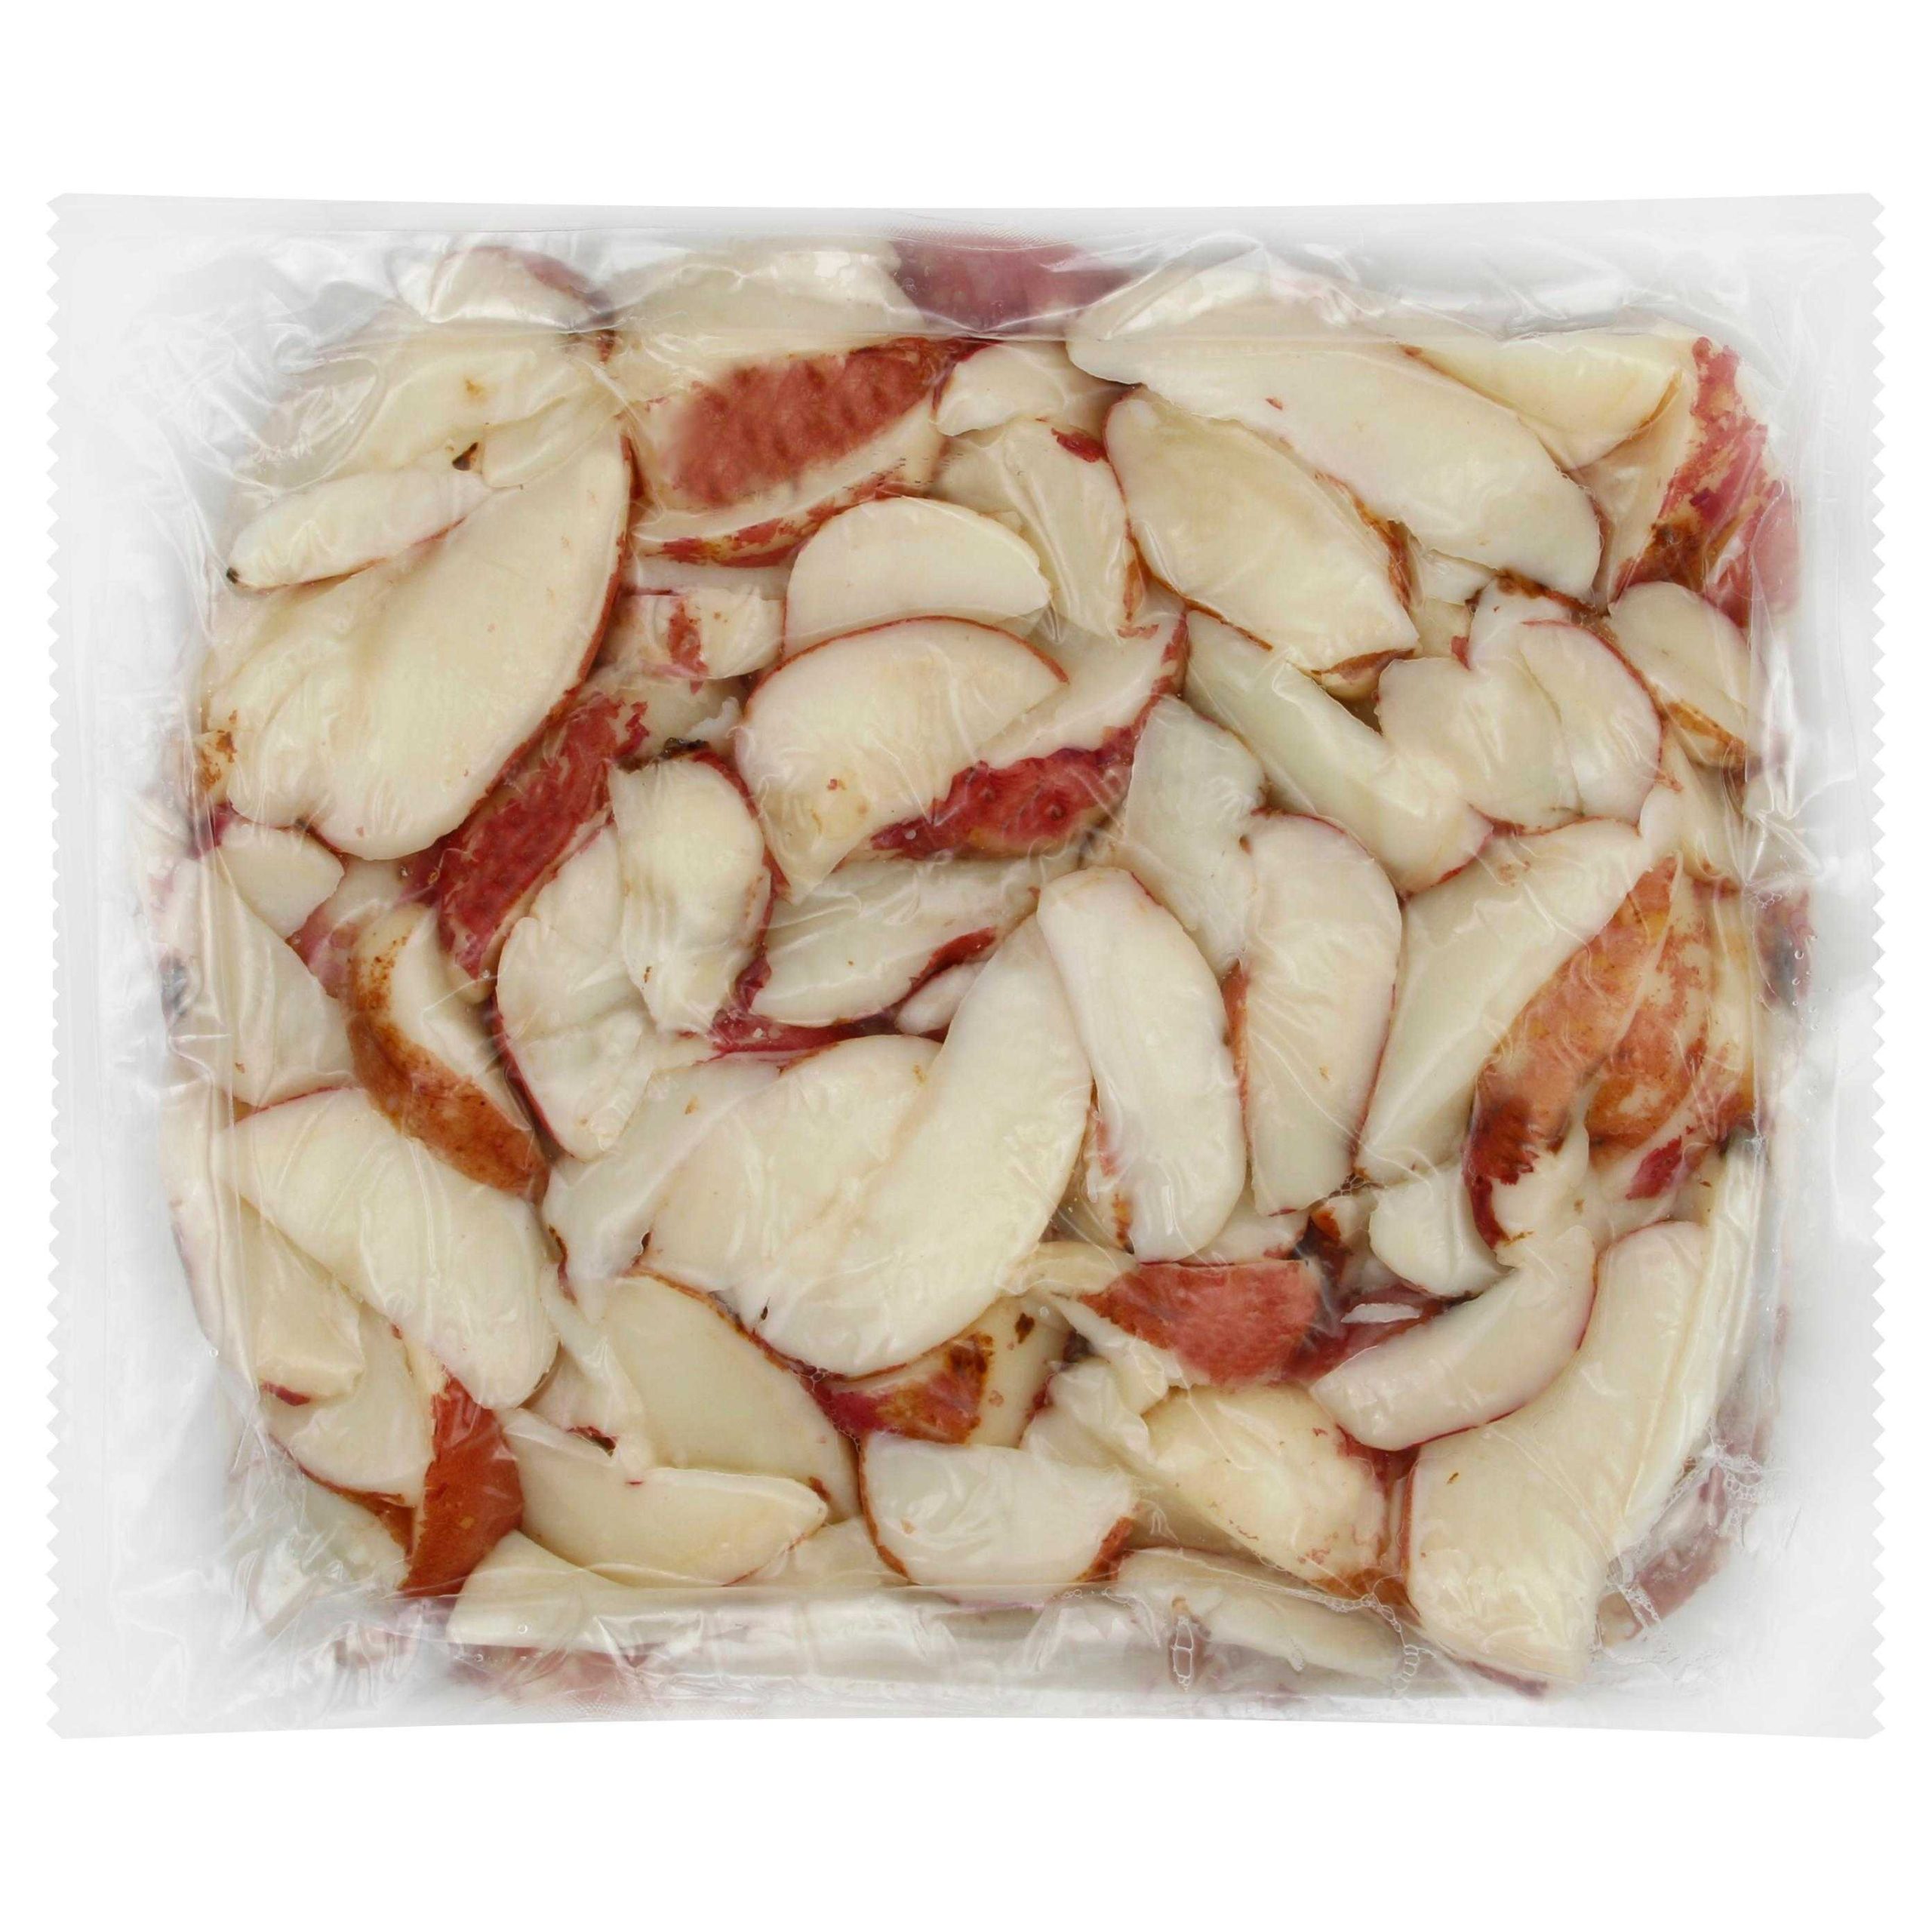 Simply Potatoes® Refrigerated Red Skin Wedges made with skin-on A-sized Red Potatoes 8-cut wedges, 2/10 Lb Bags